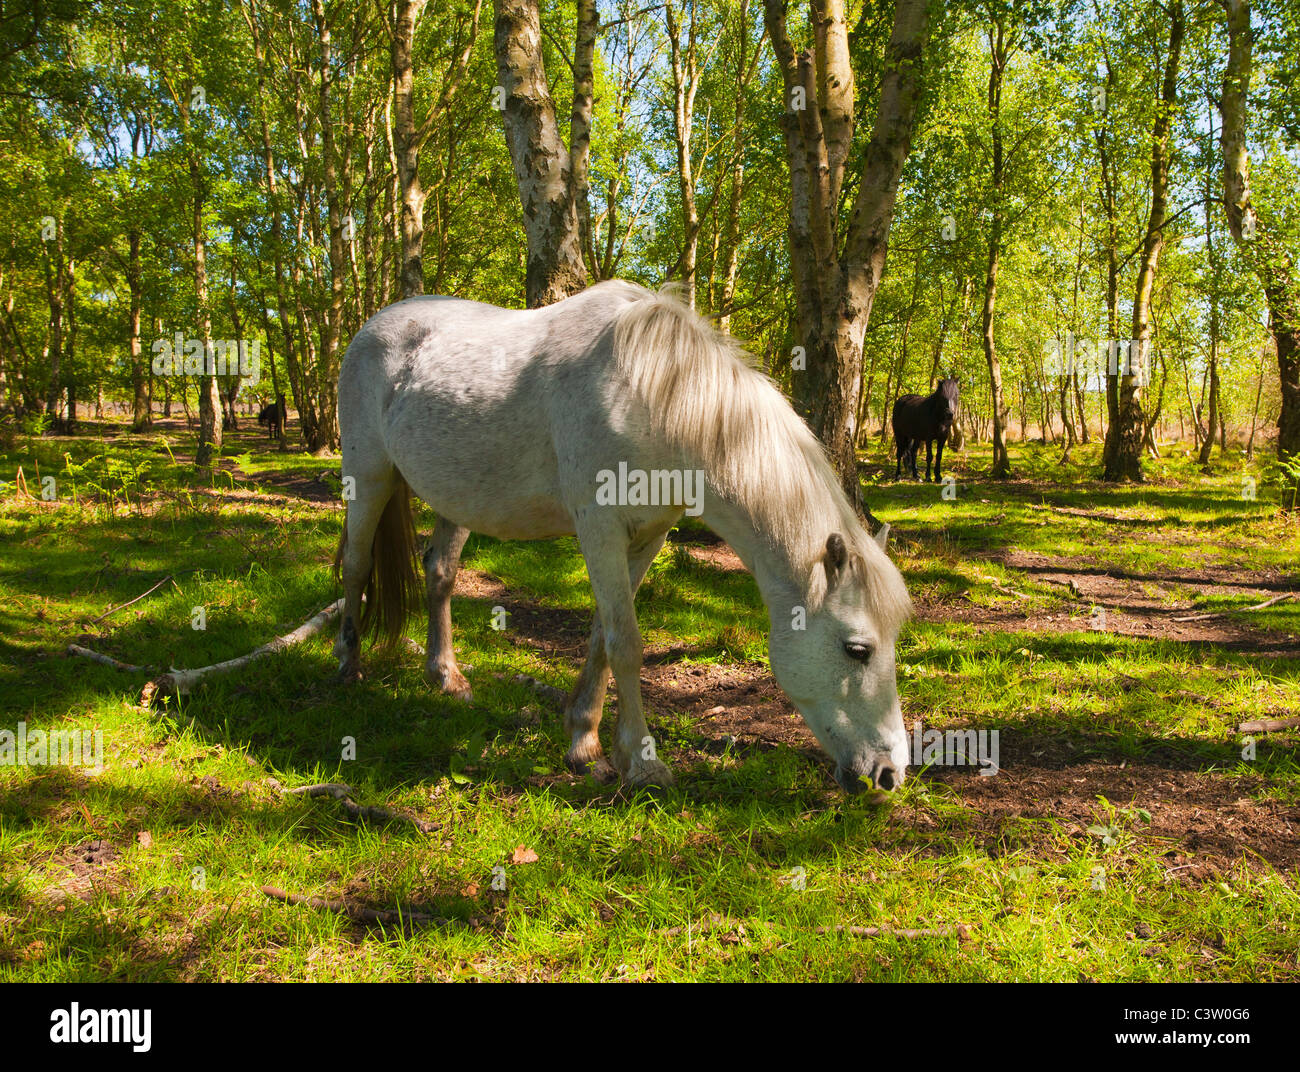 Pony in woodland at Roydon Common in Norfolk, England. Stock Photo